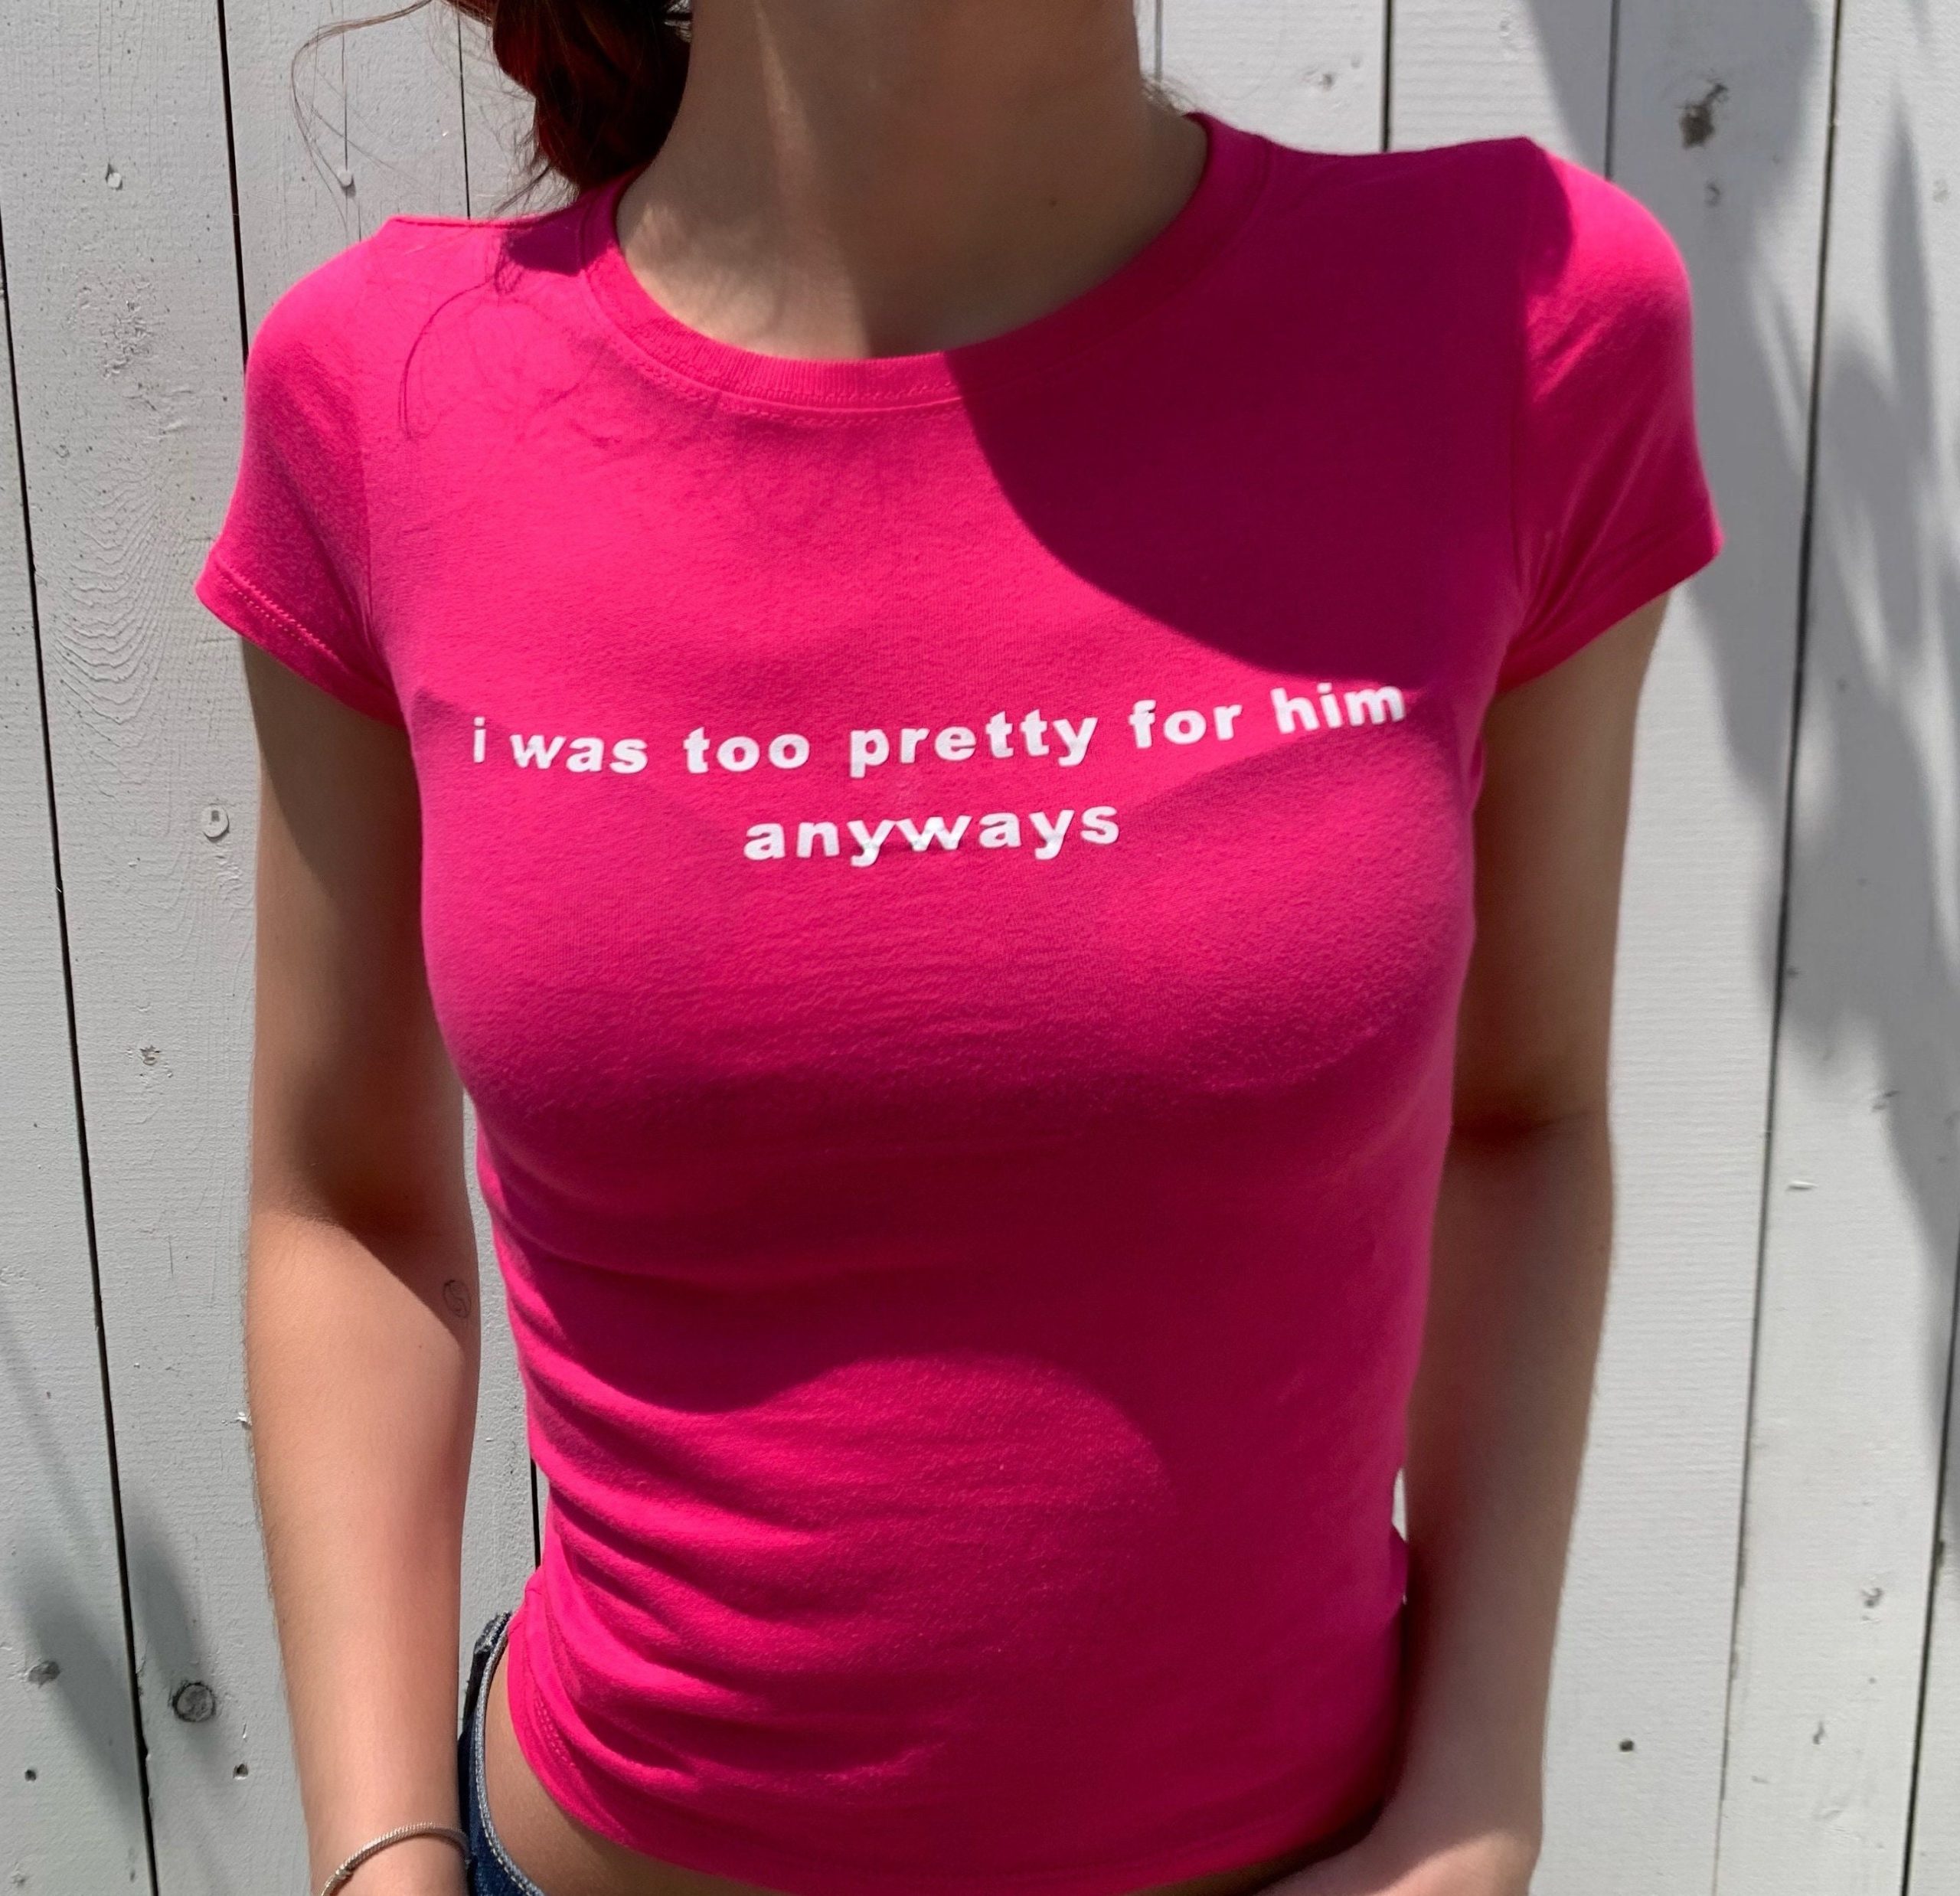 Vintage Y2K "I Was Too Pretty For Him Anyways" Baby Tee